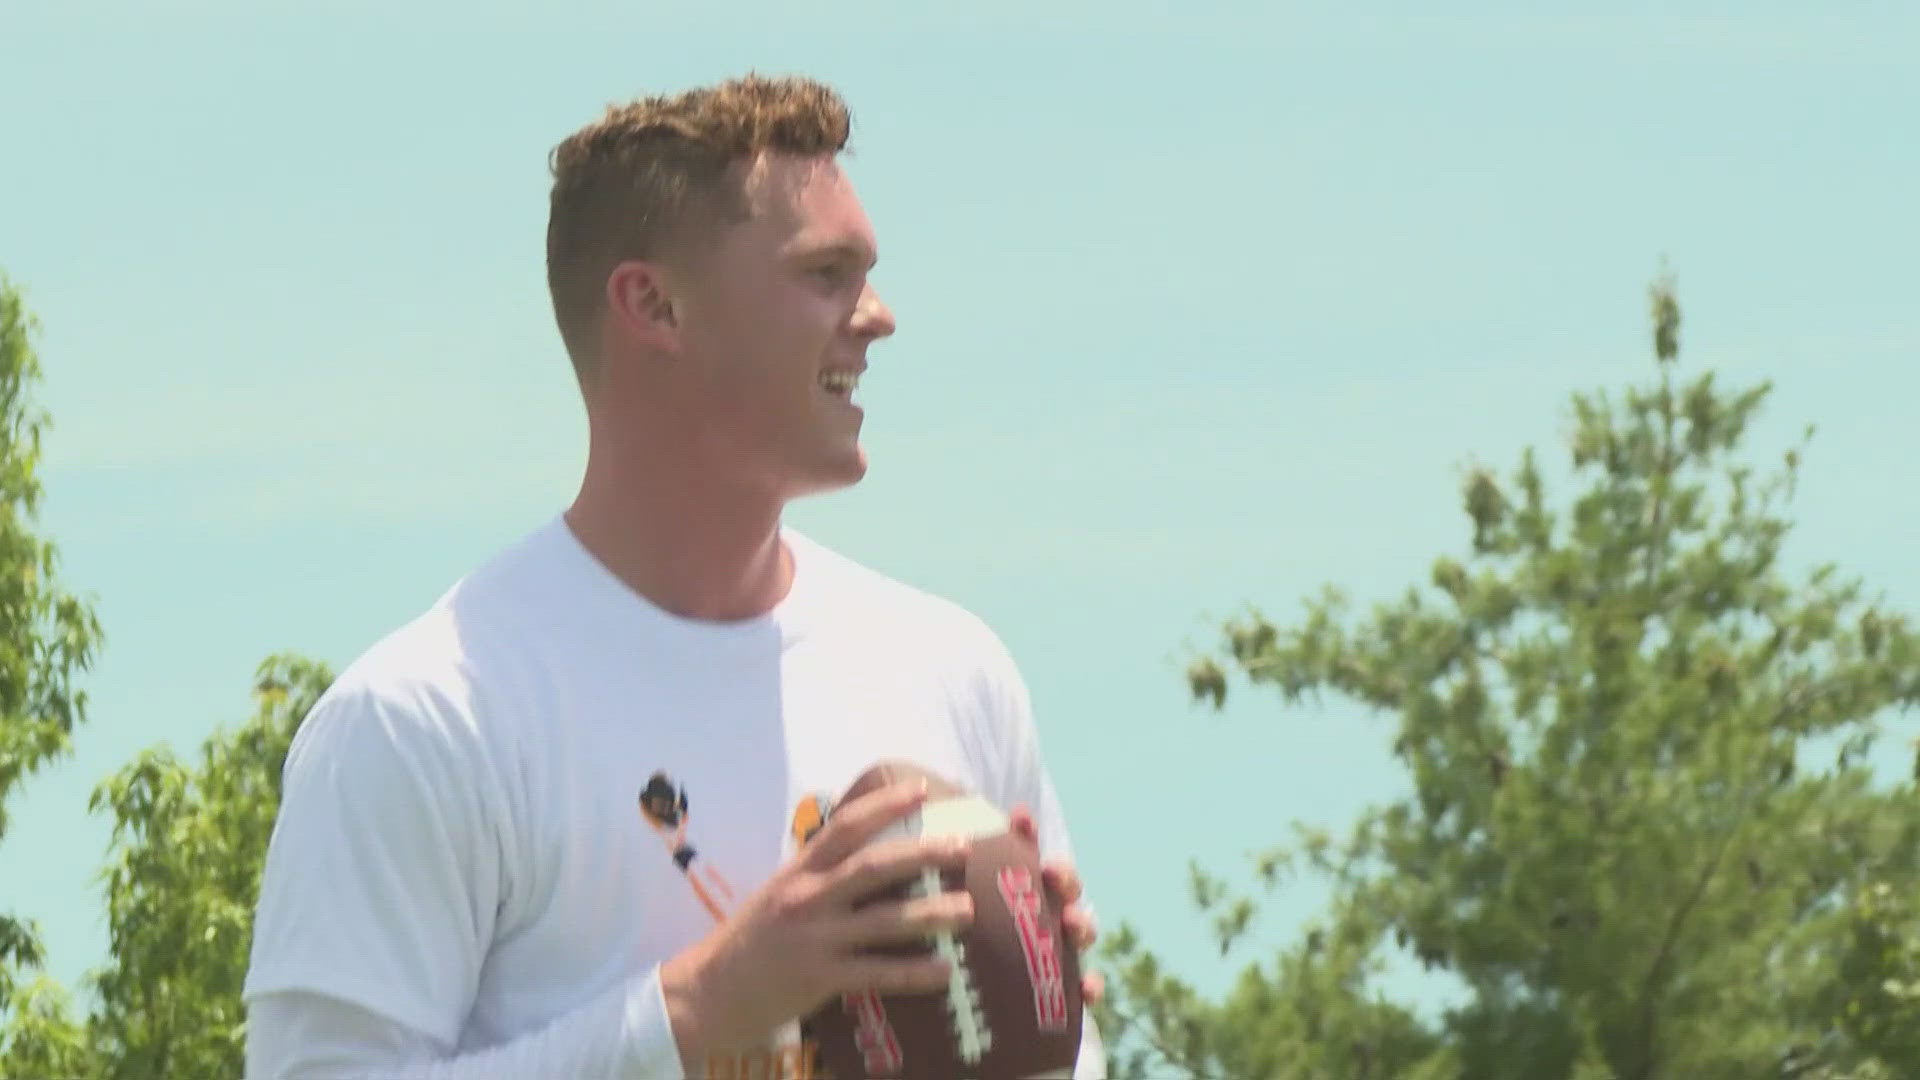 Mizzou quarterback Brady Cook hosted his first football camp for kids. Roughly 175 campers turned out to learn at the feet of the senior.